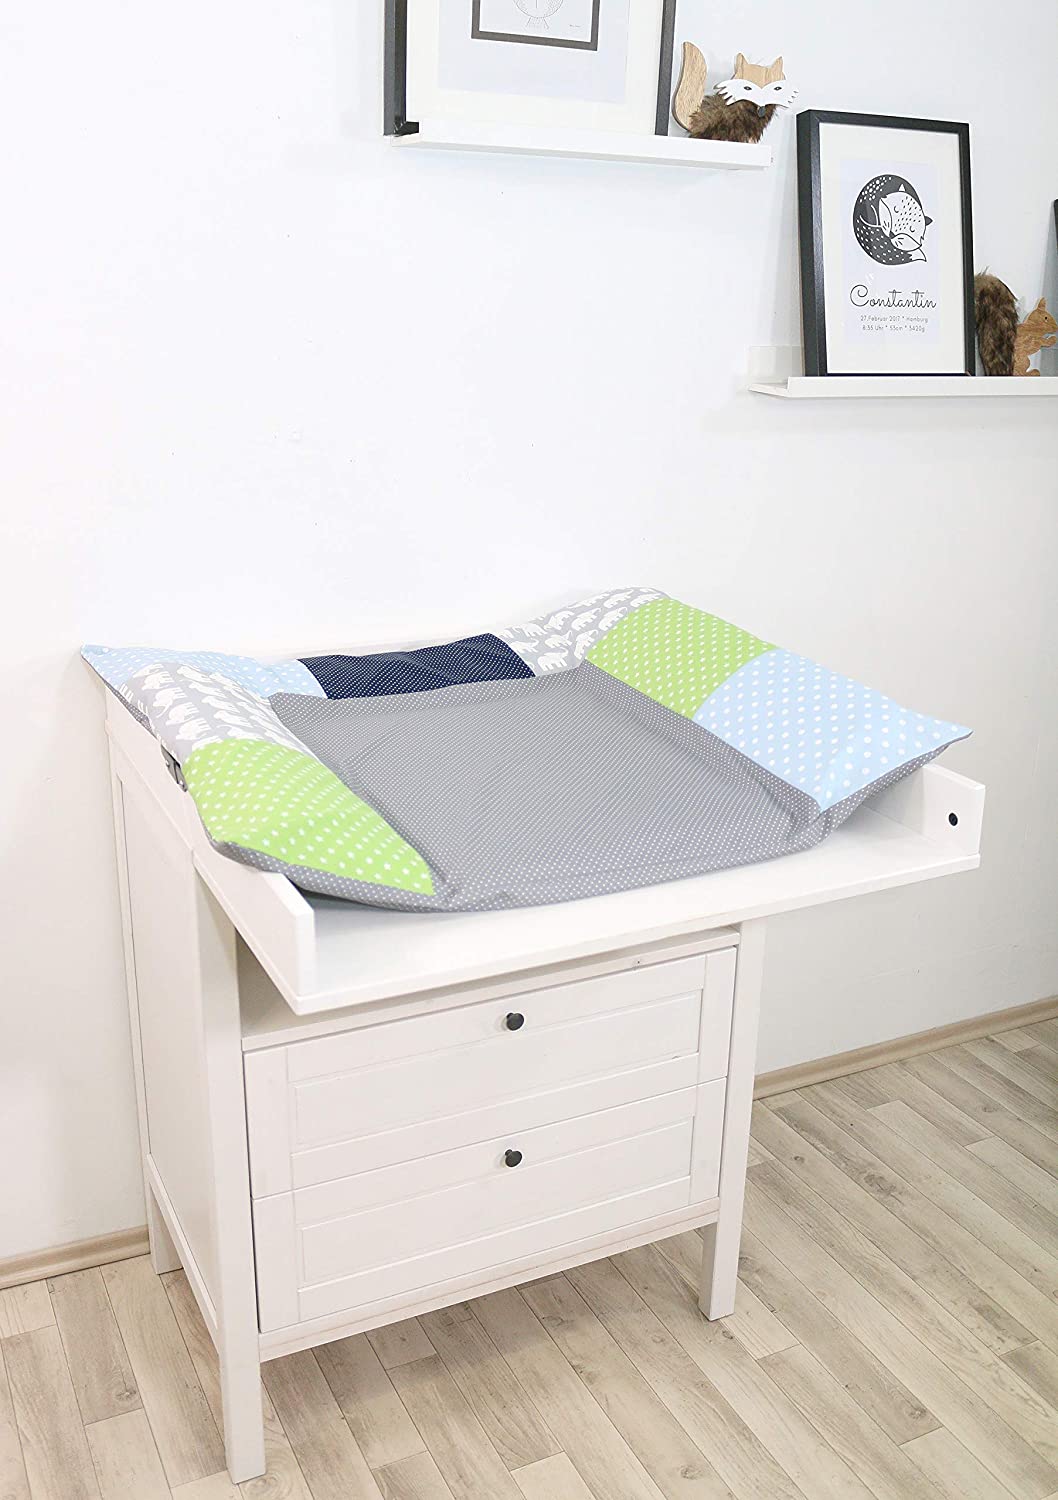 ULLENBOOM ® Changing Mat Cover 75 x 85 cm Anchor Blue (Made in EU) - Removable Cover for Changing Mat 85 x 75 cm, Baby Cover for Changing Mat Made of Cotton, Changing Cover for Changing Table